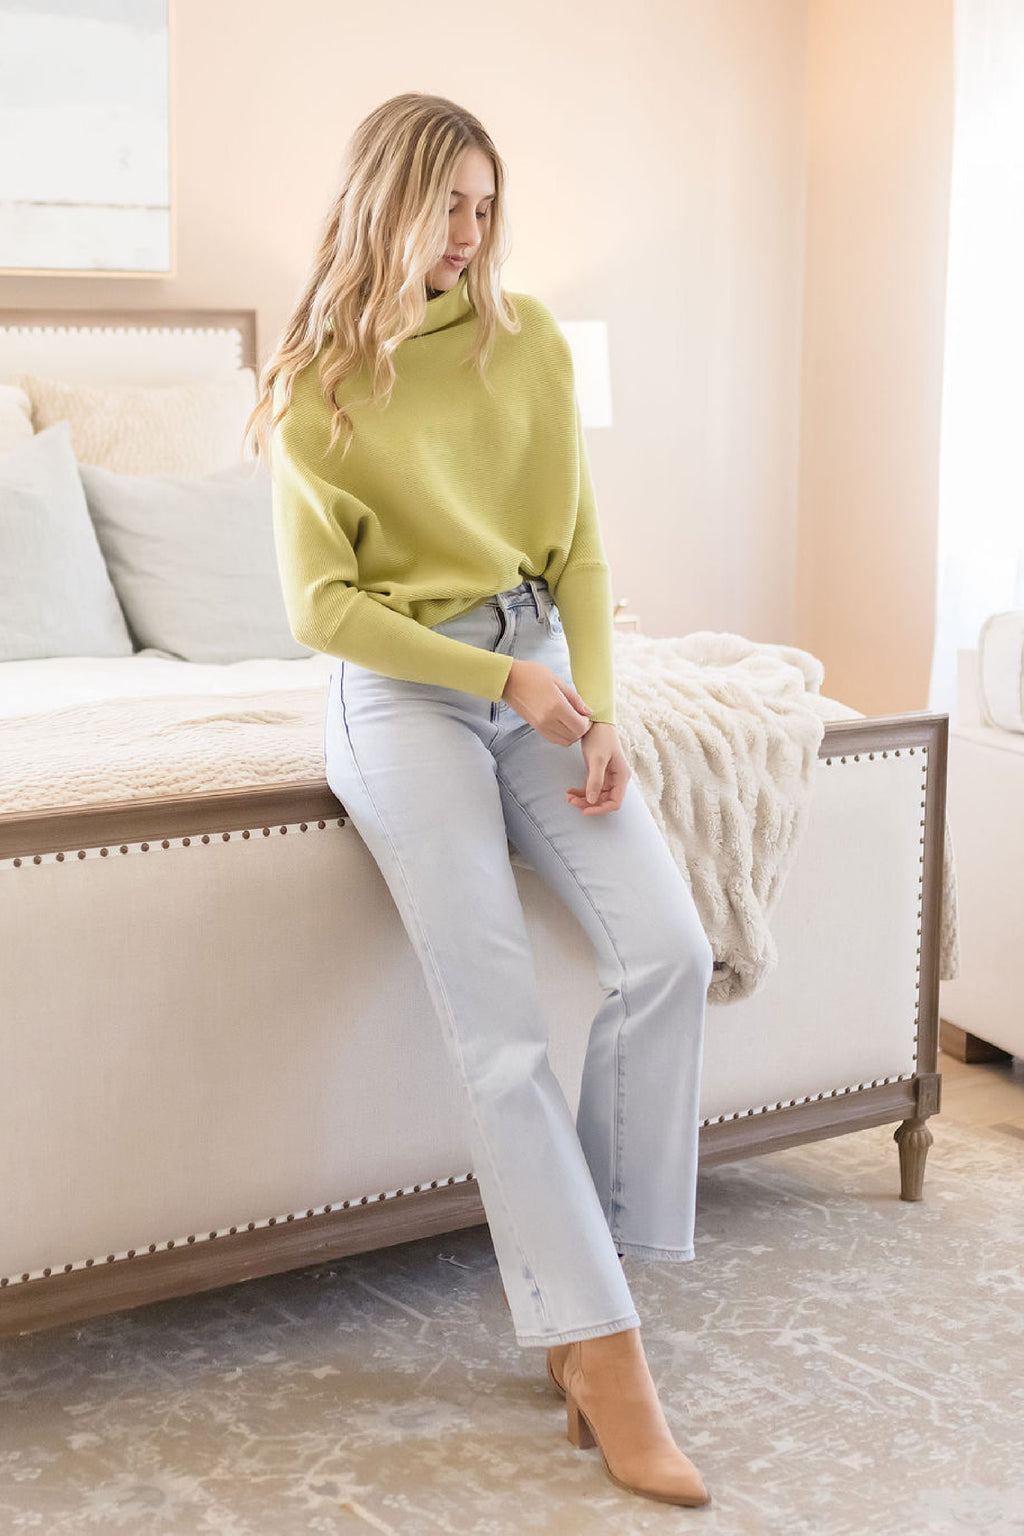  Long Sleeve Slouched Funnel Neck Sweater Green